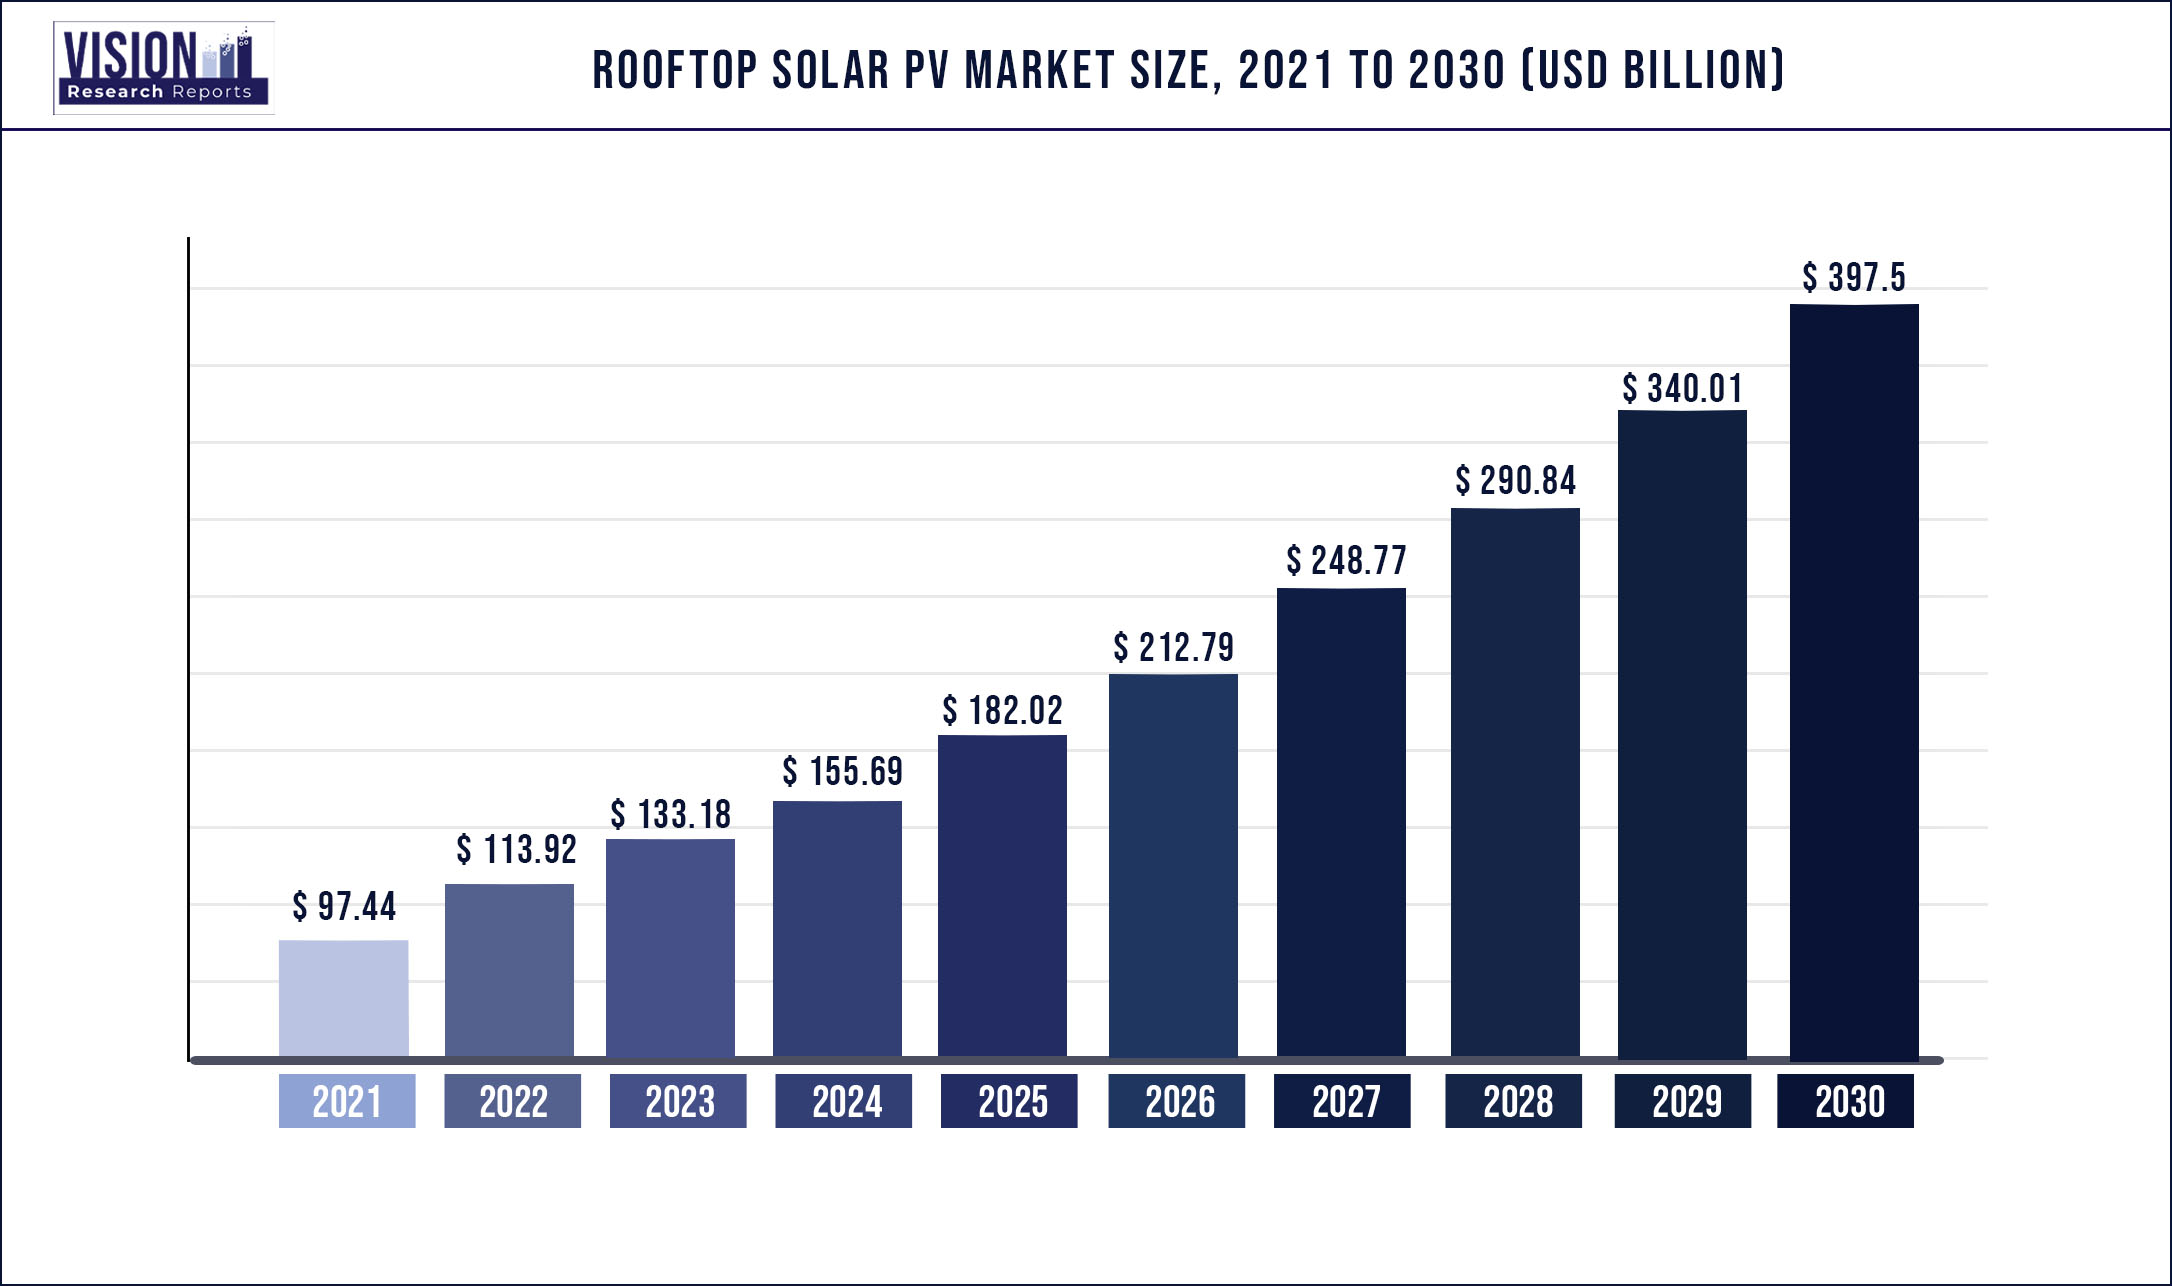 Rooftop Solar PV Market Size 2021 to 2030